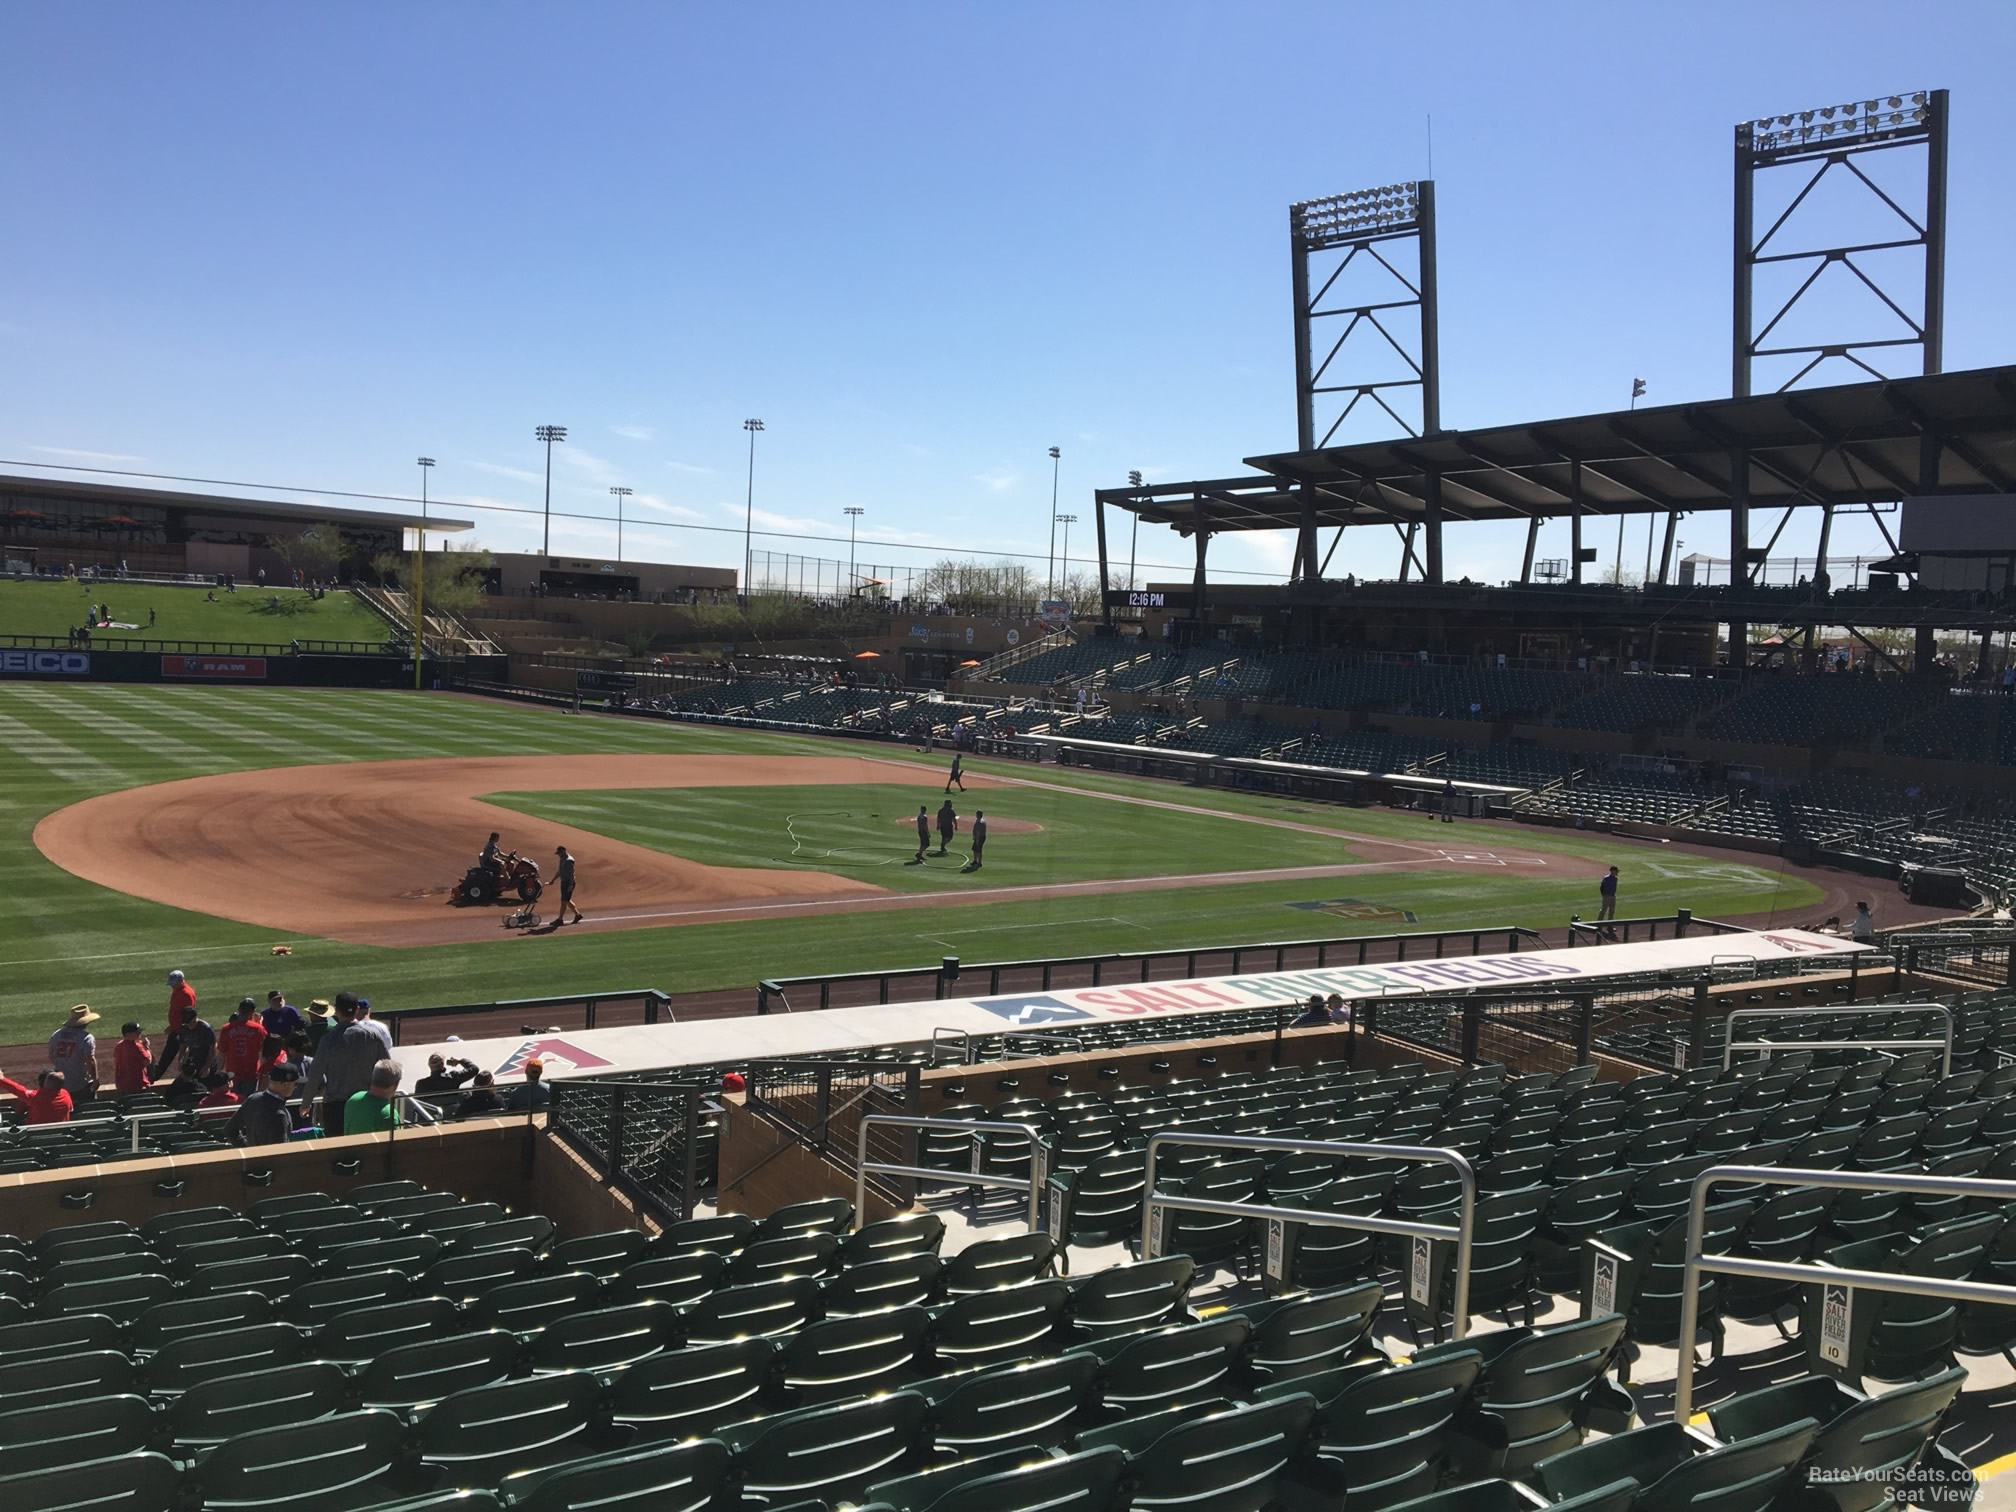 section 220, row 14 seat view  - salt river field at talking stick